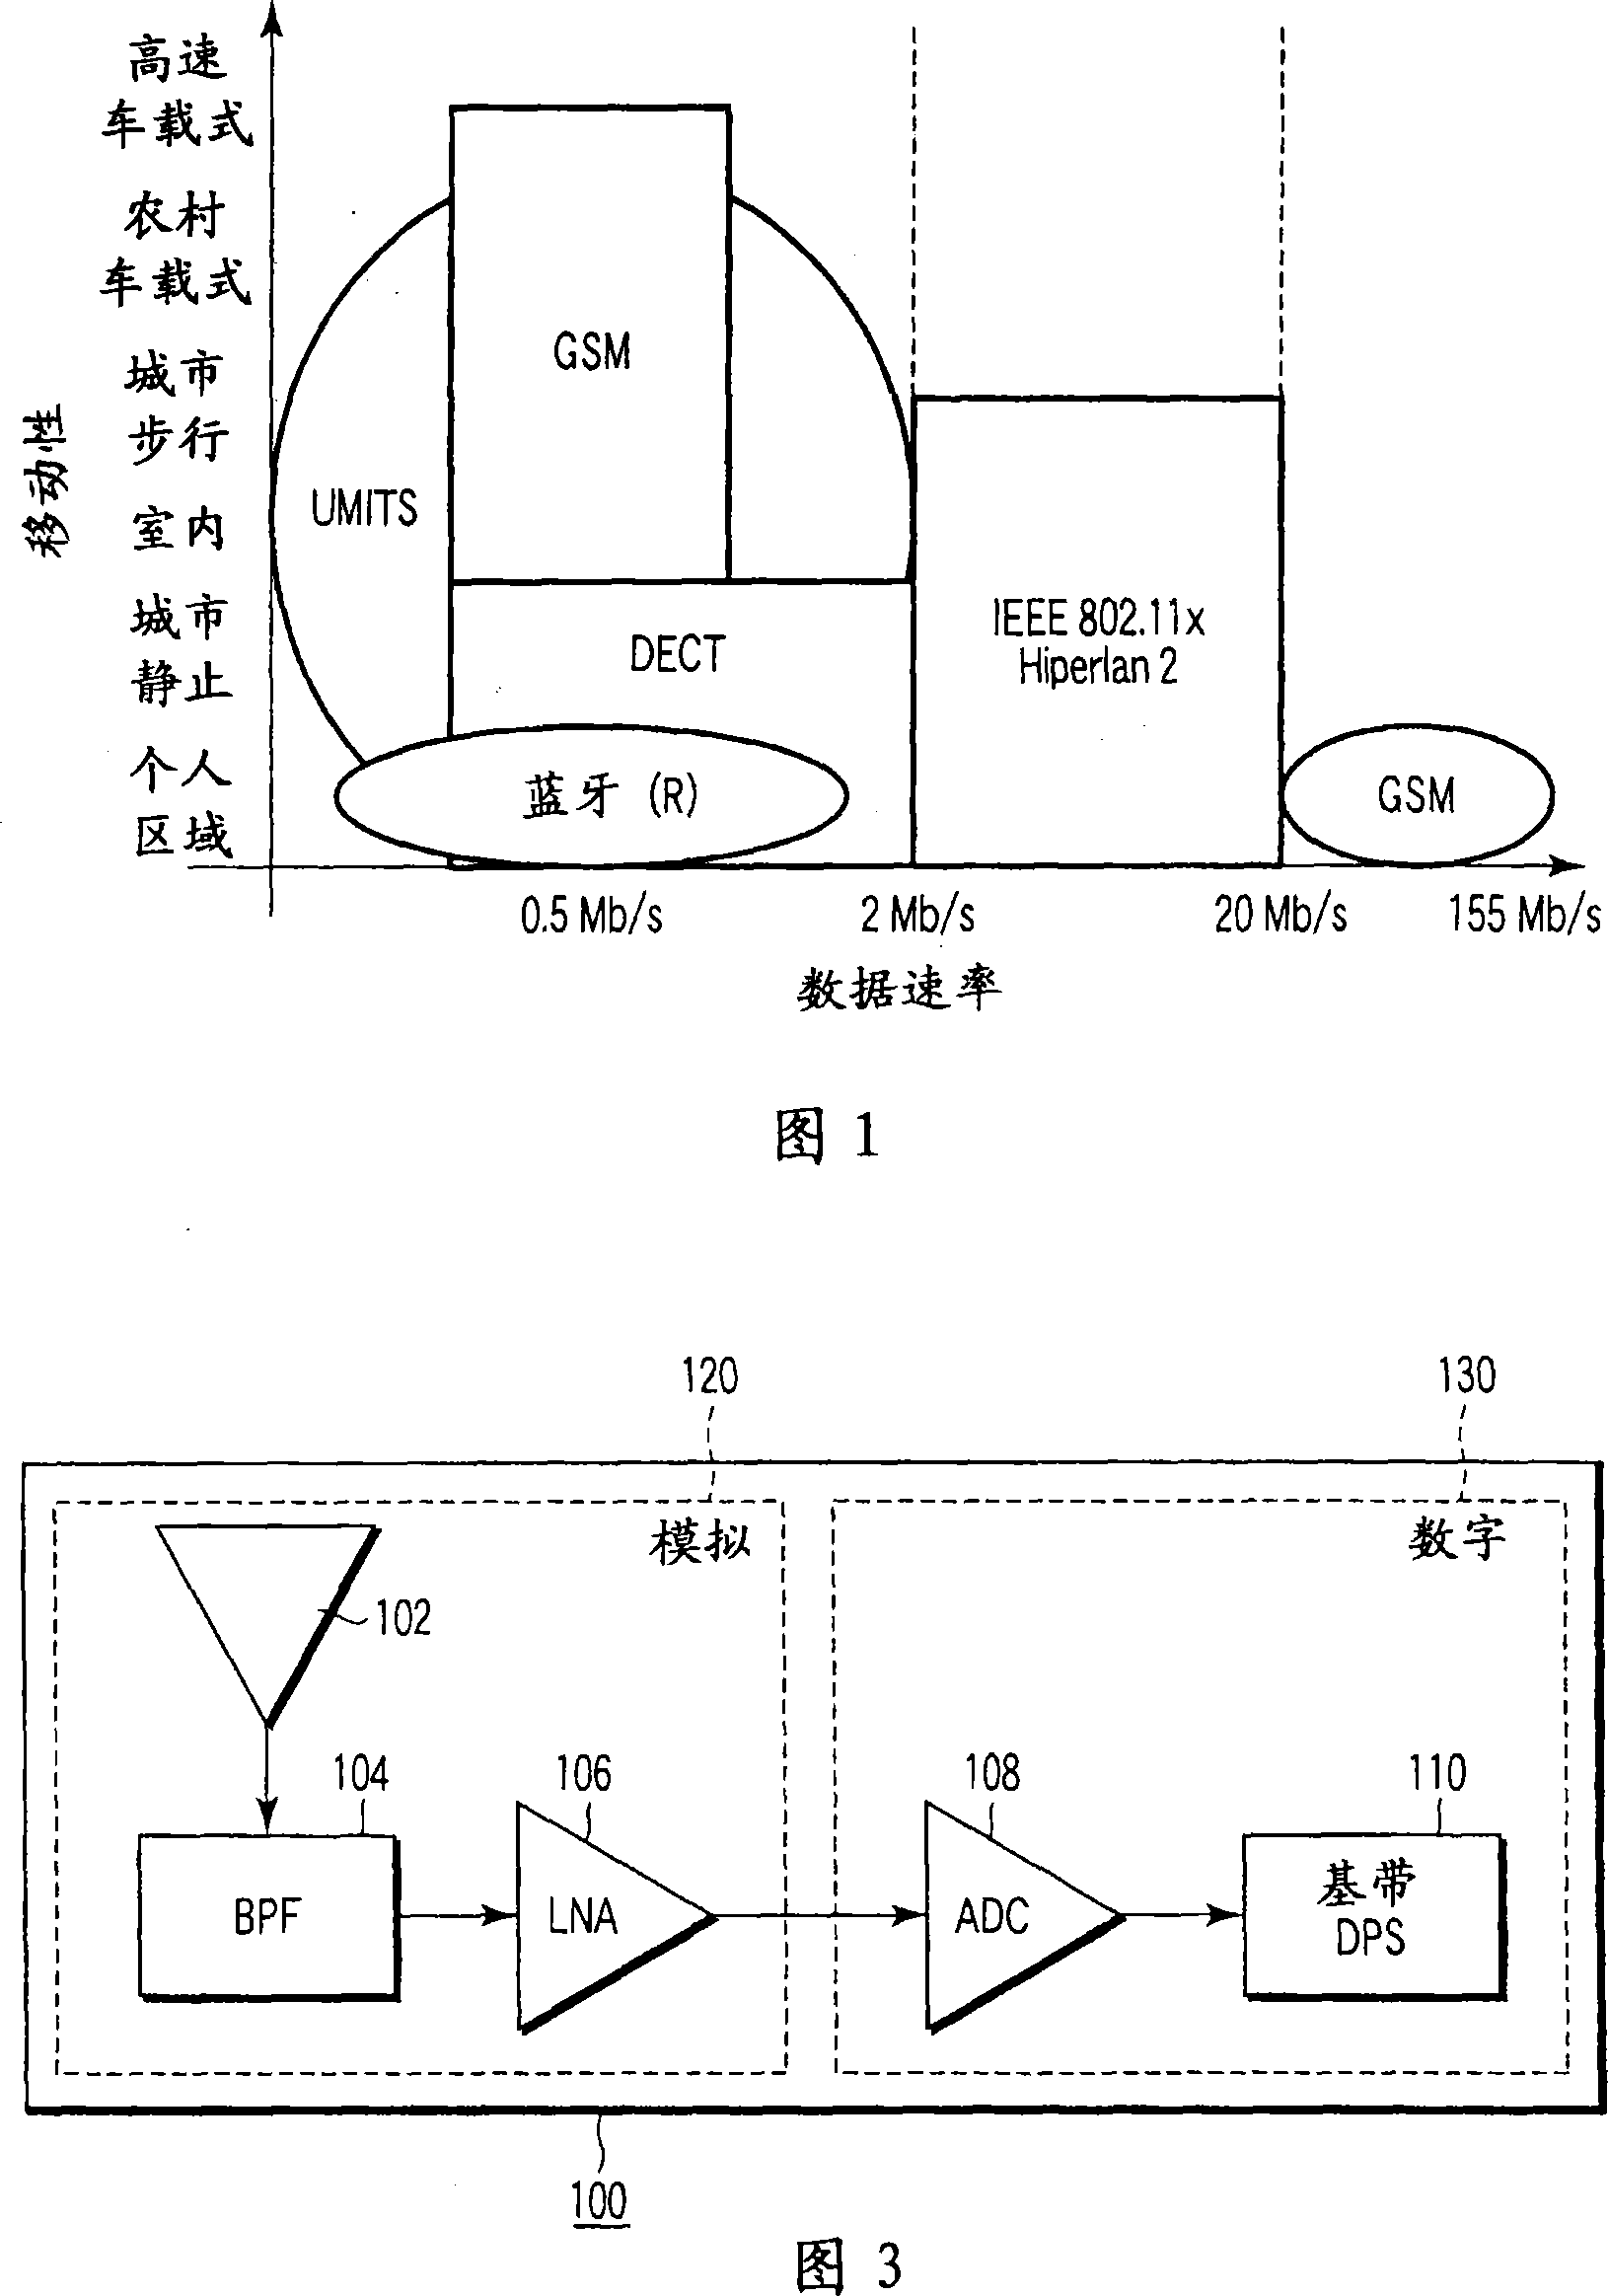 Method and apparatus for wireless communication using location based service discovery